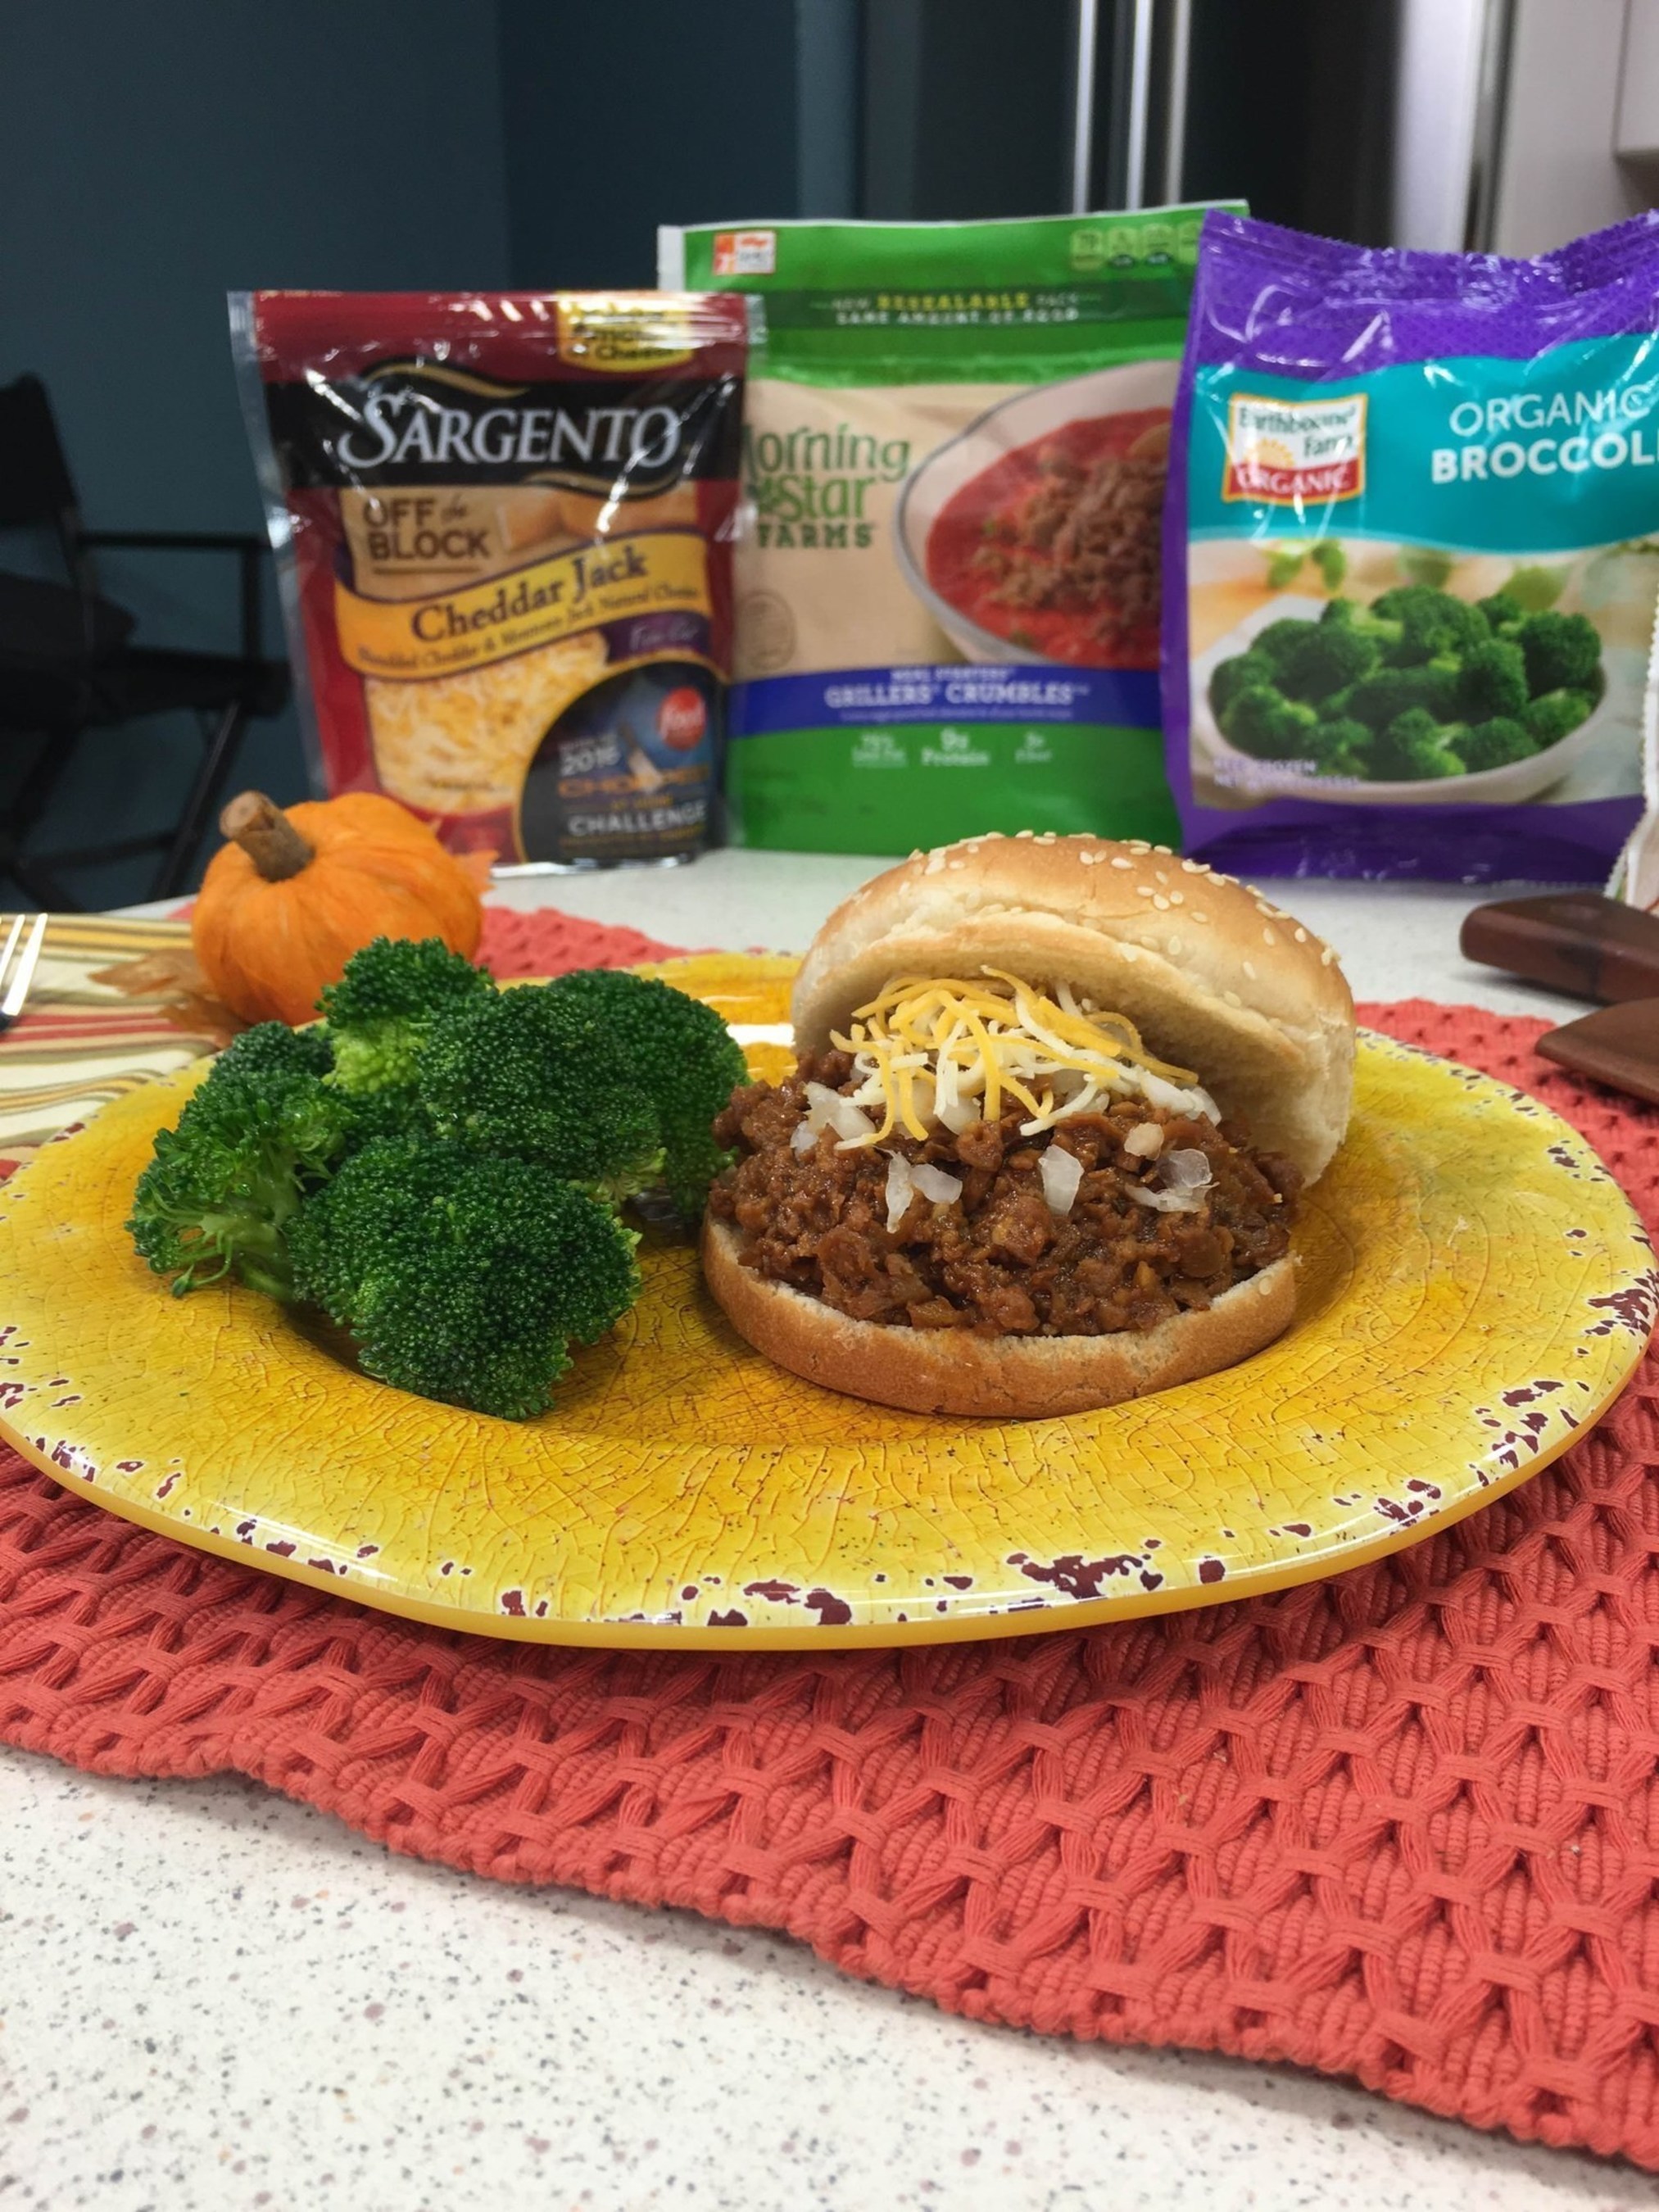 Your family will love these tasty, healthy Vegetarian Sloppy Joes, made with delicious ingredients from the frozen and refrigerated aisles of your local grocery store.